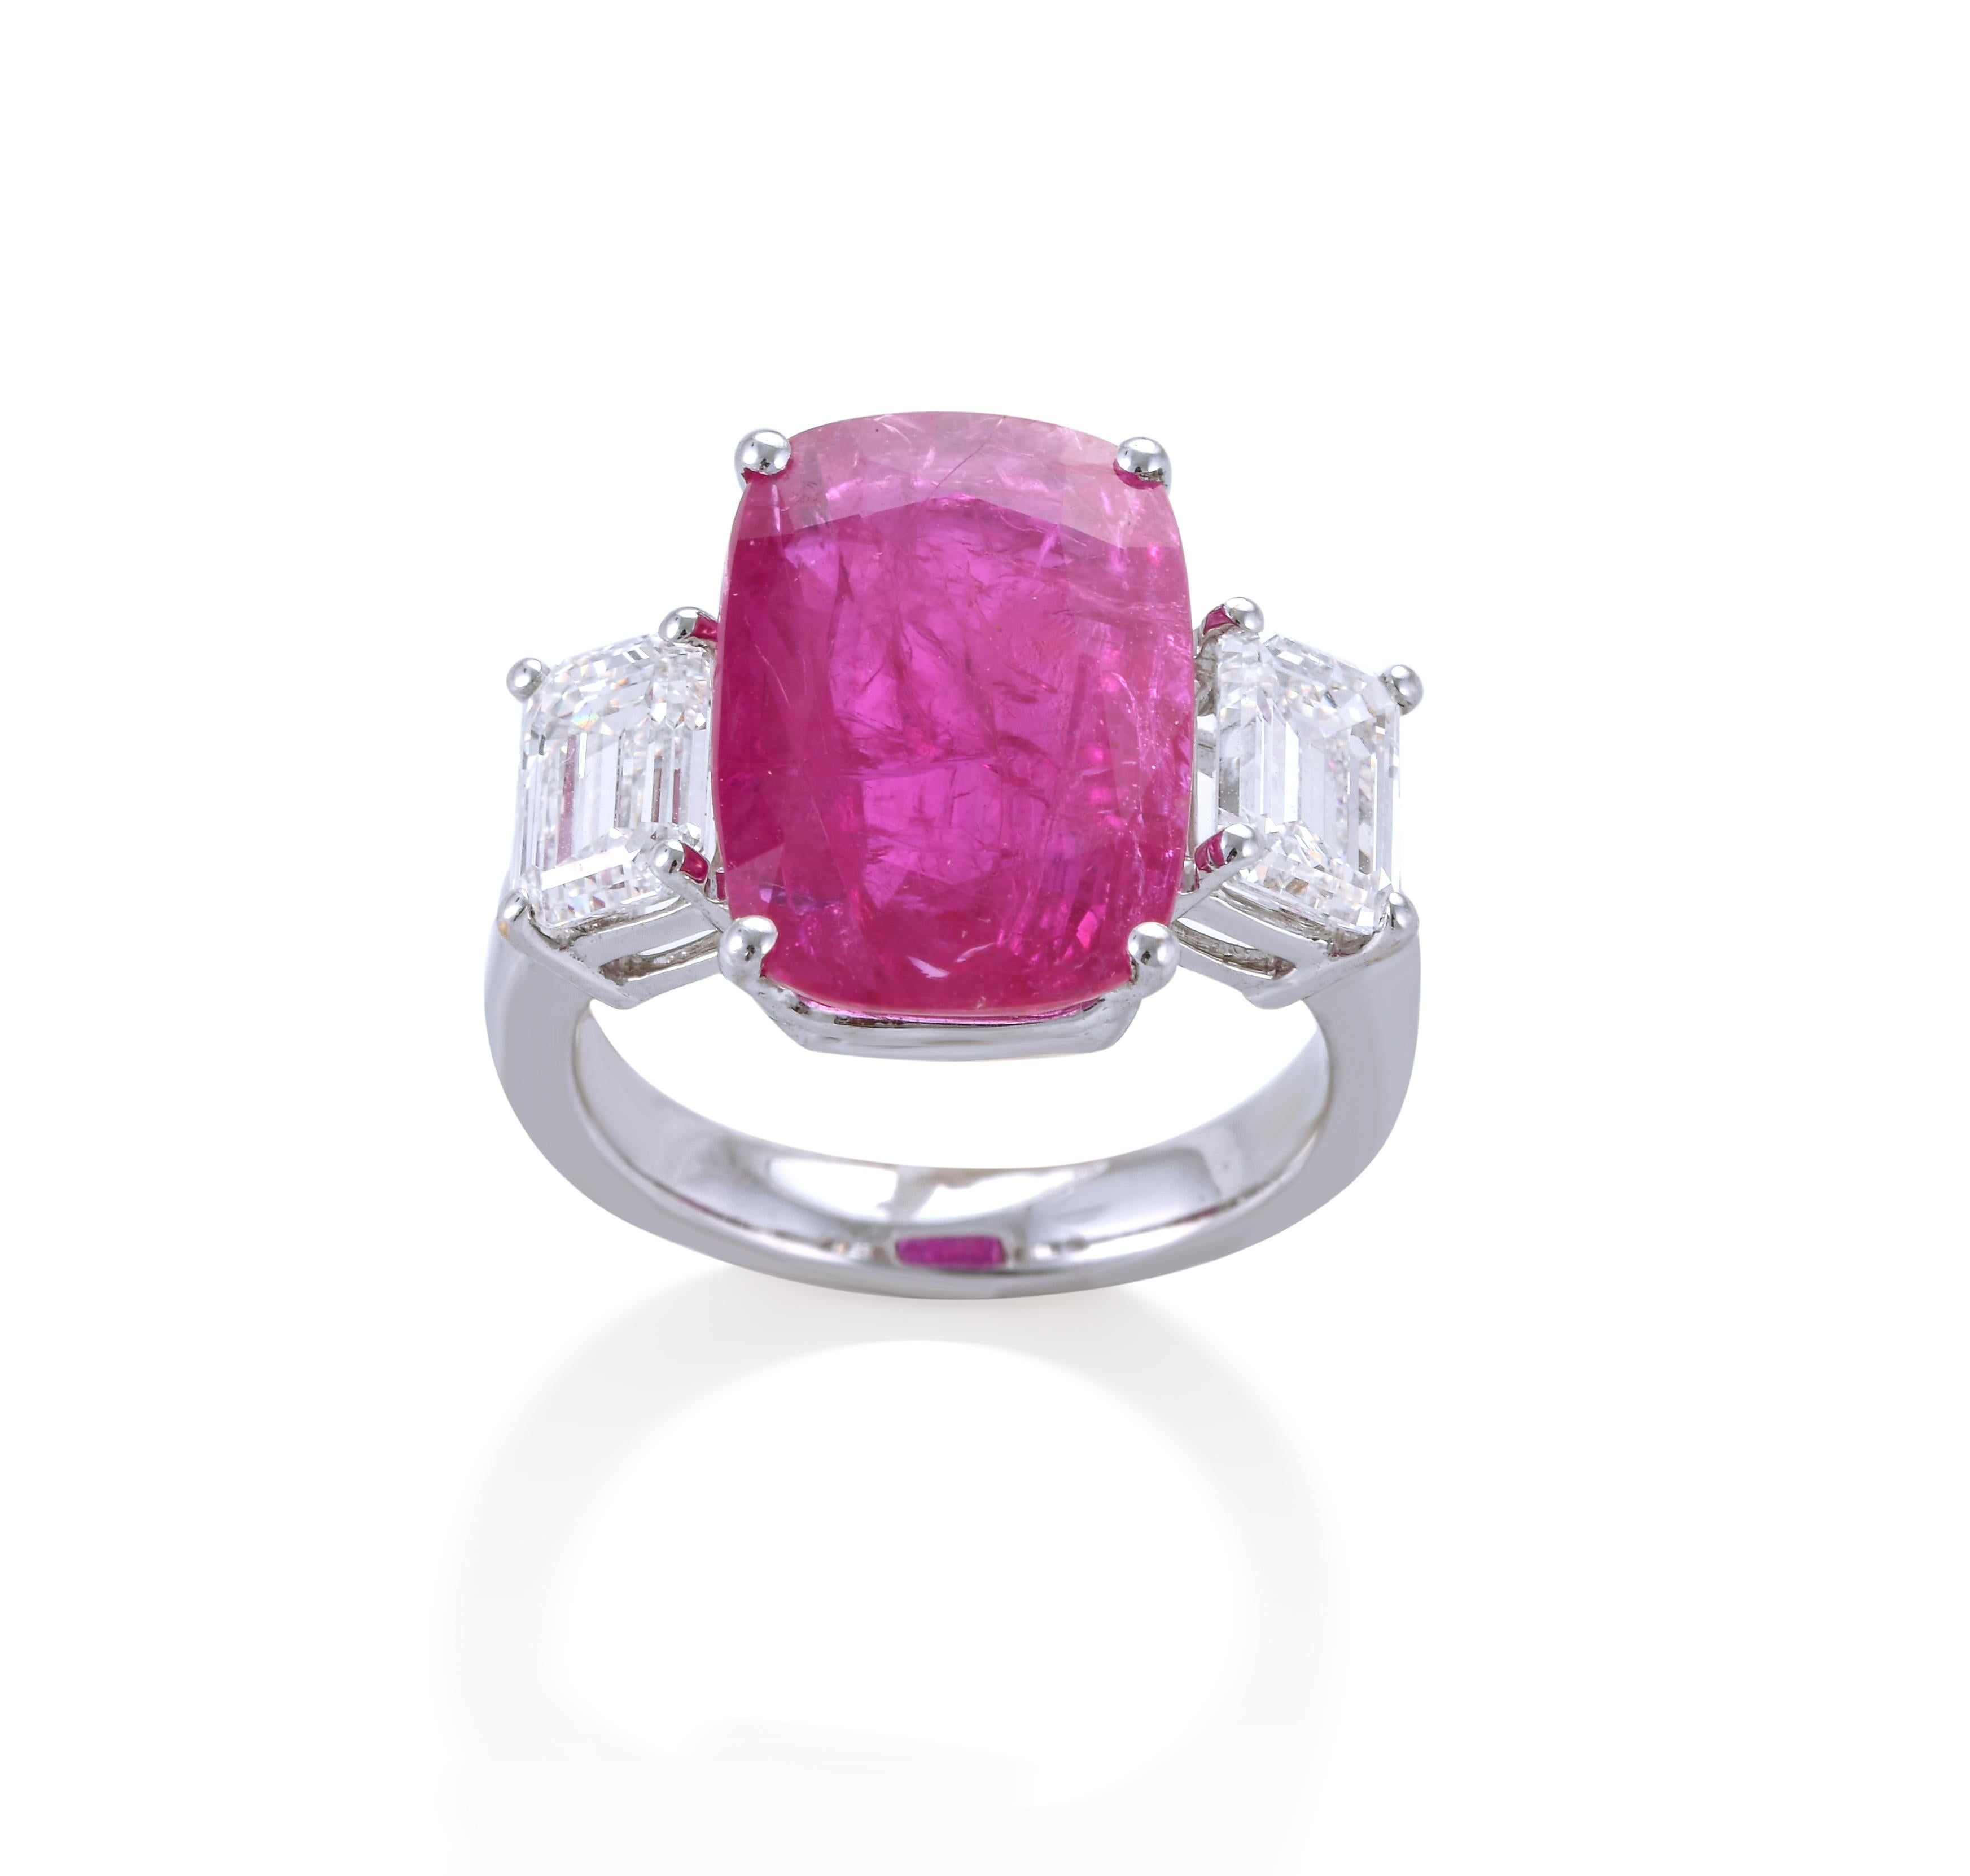 Classic 6.61 Carat Ruby Ring with 2.01 Carat Emerald Cut Diamonds In New Condition For Sale In Mumbai, Maharashtra